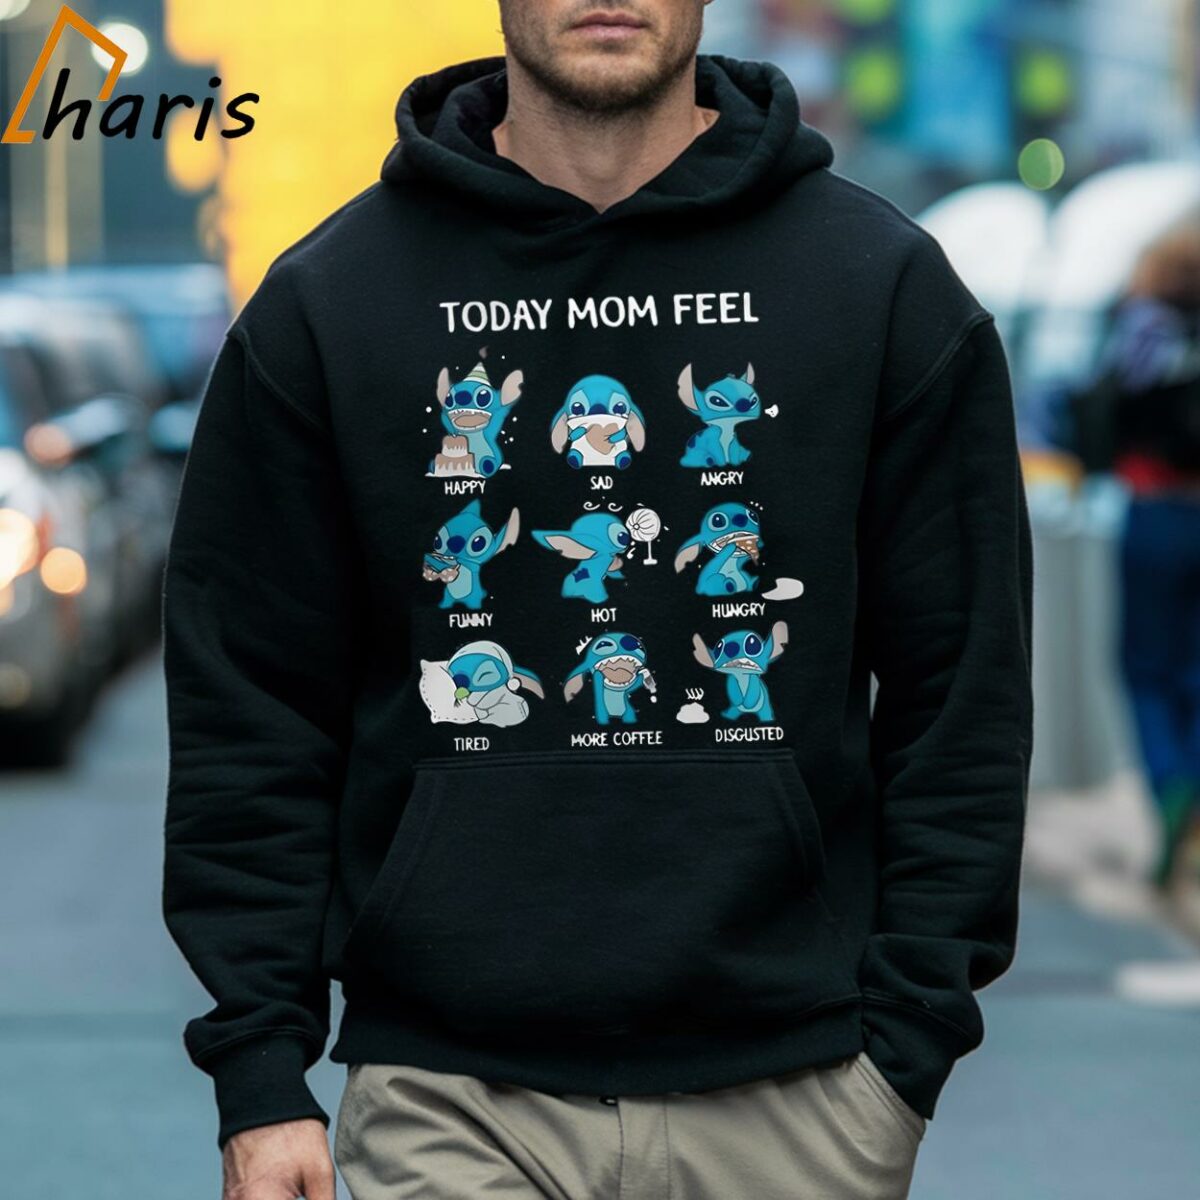 Today Mom Feel Happy Sad Angry Funny Hot Hungry Stitch Shirt 5 Hoodie